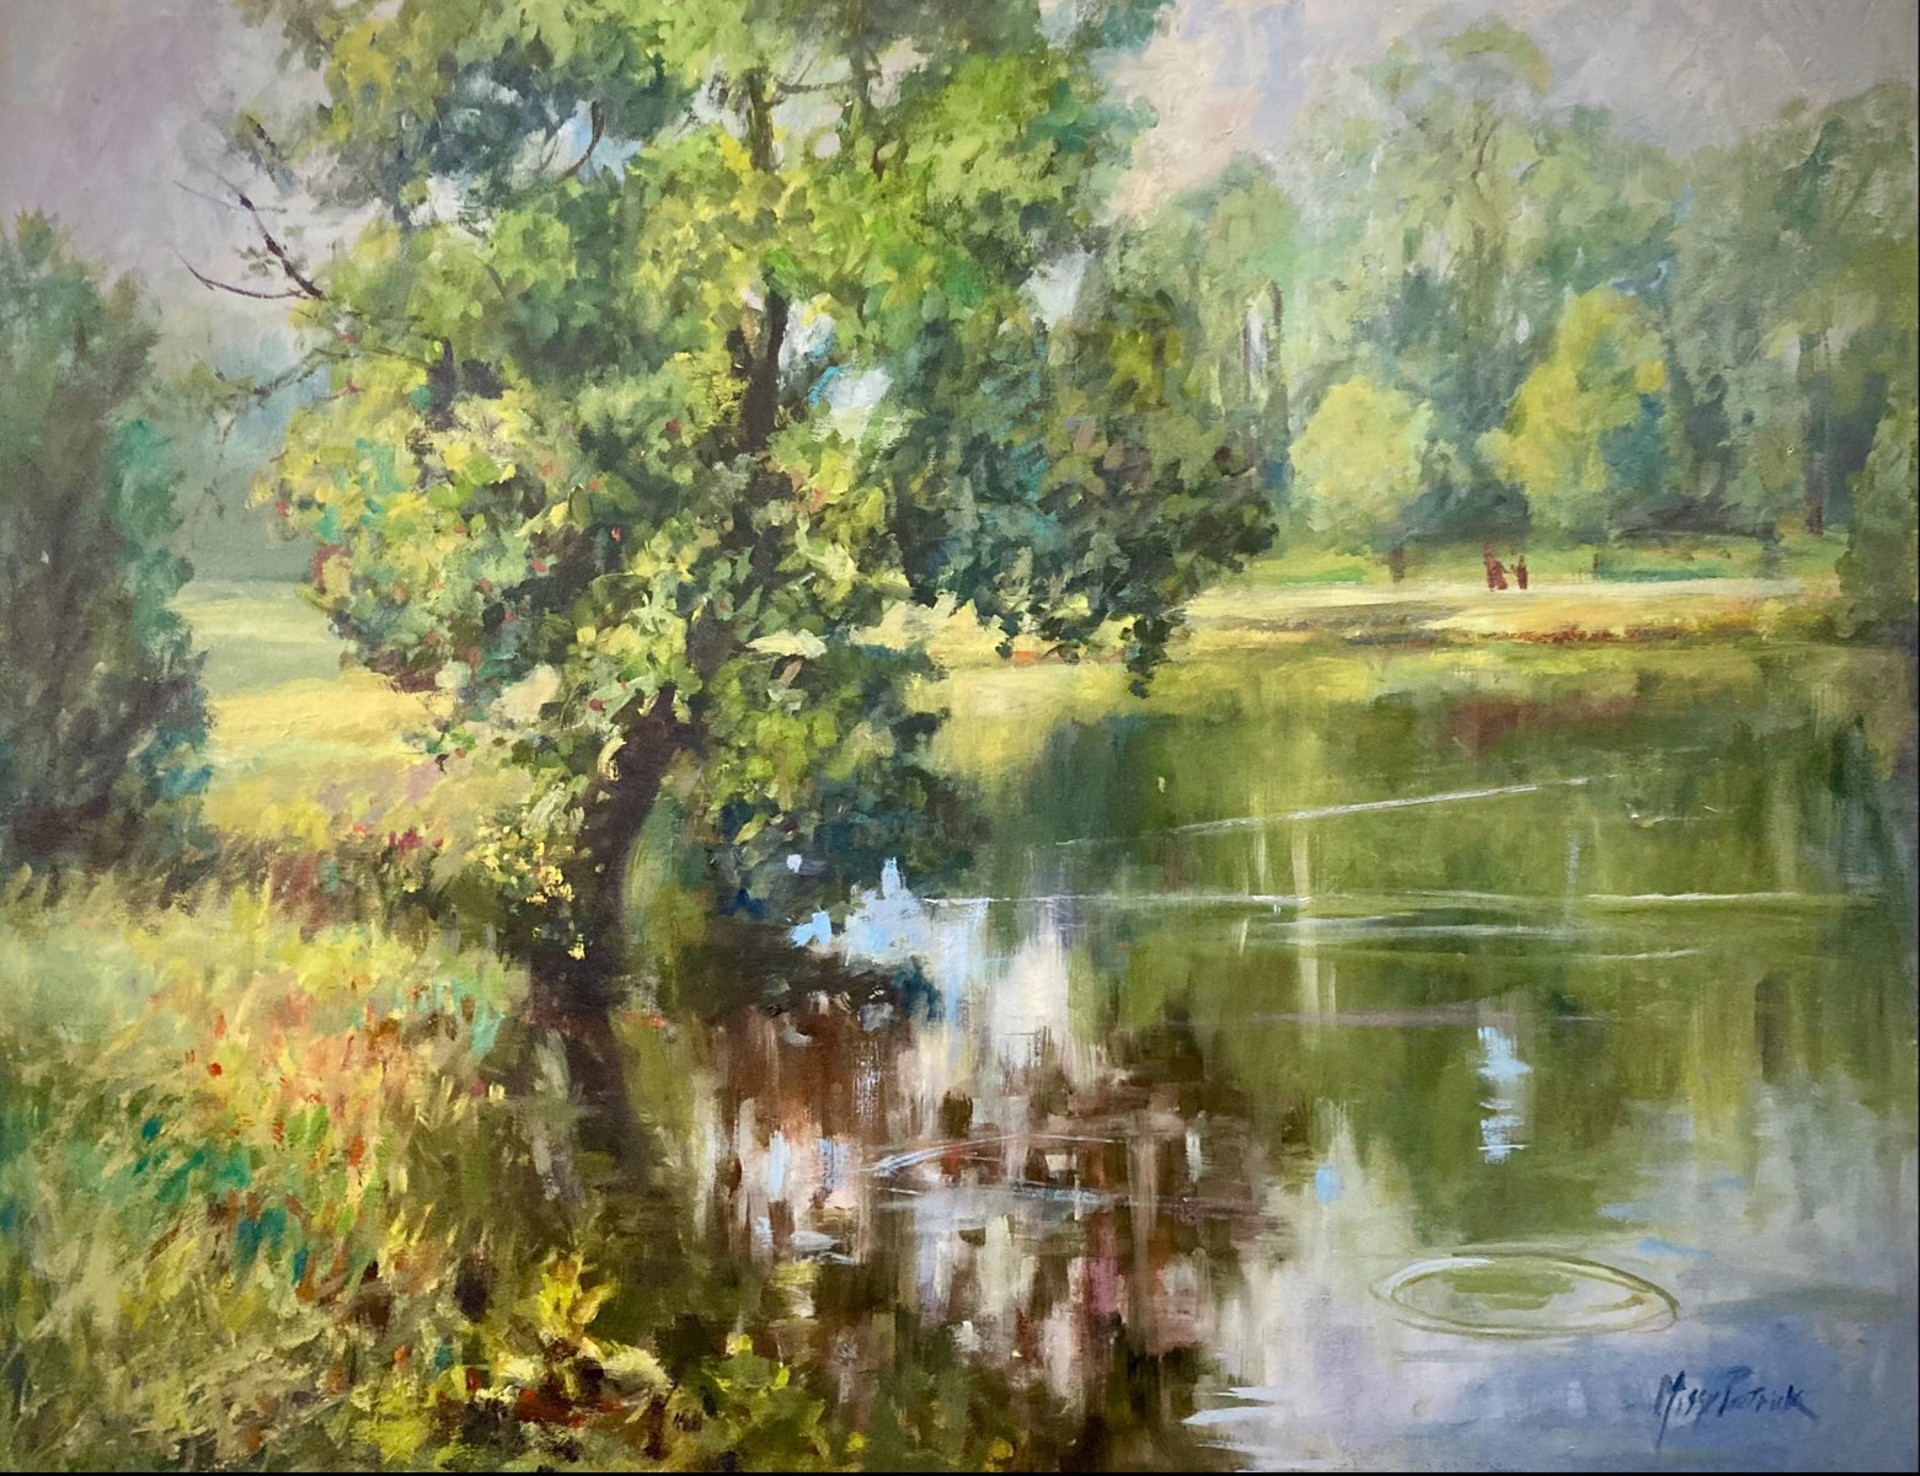 The Pond in Summer by Missy Patrick